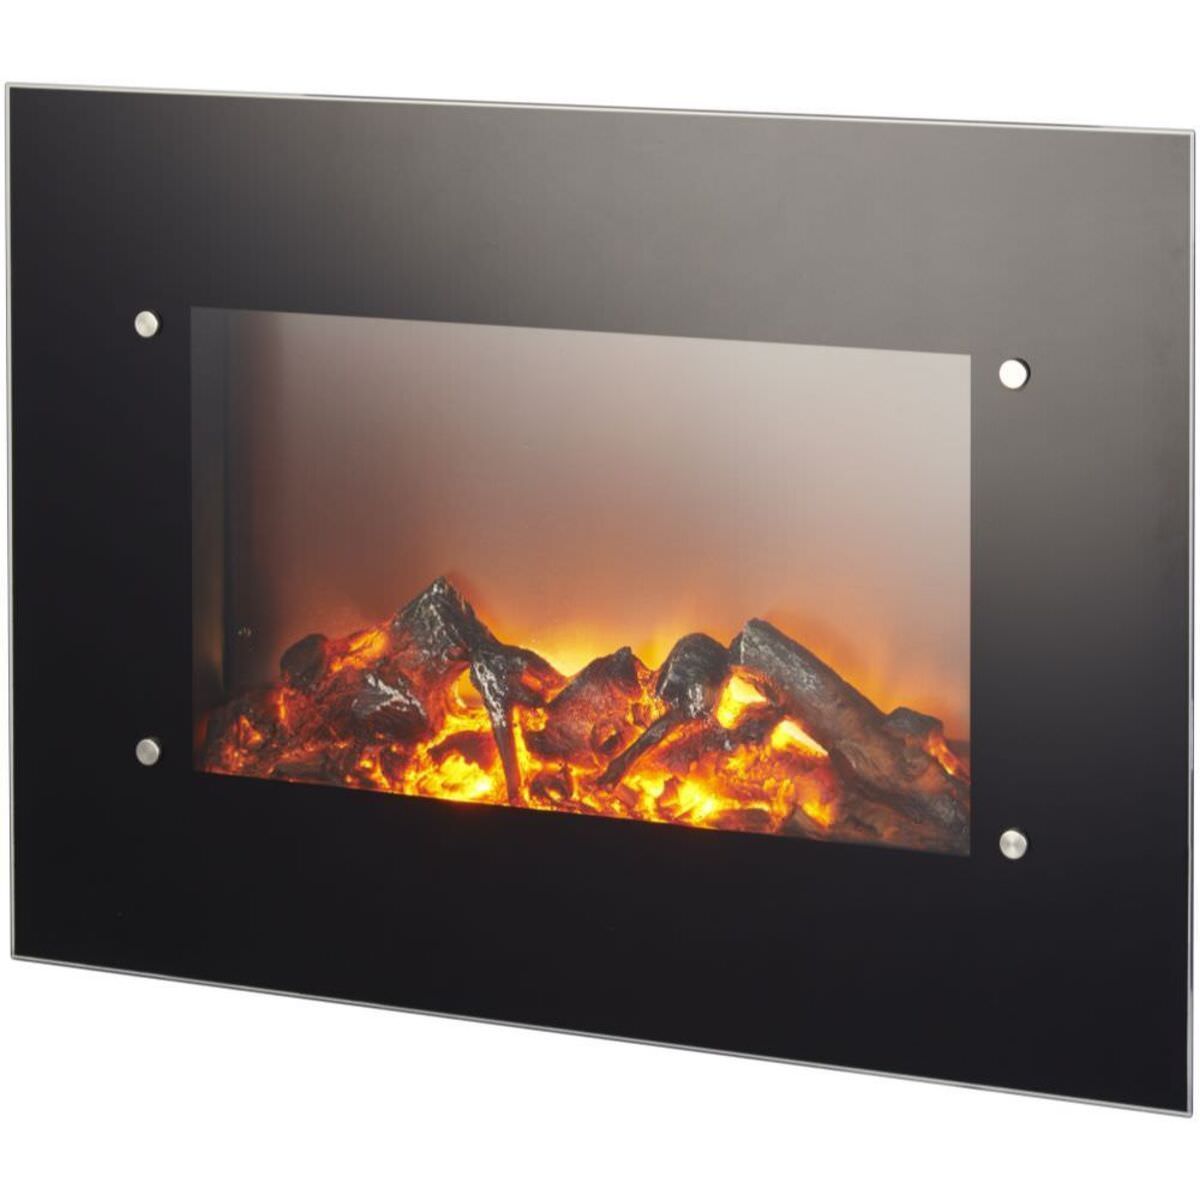 Wall Electric Fire with remote control